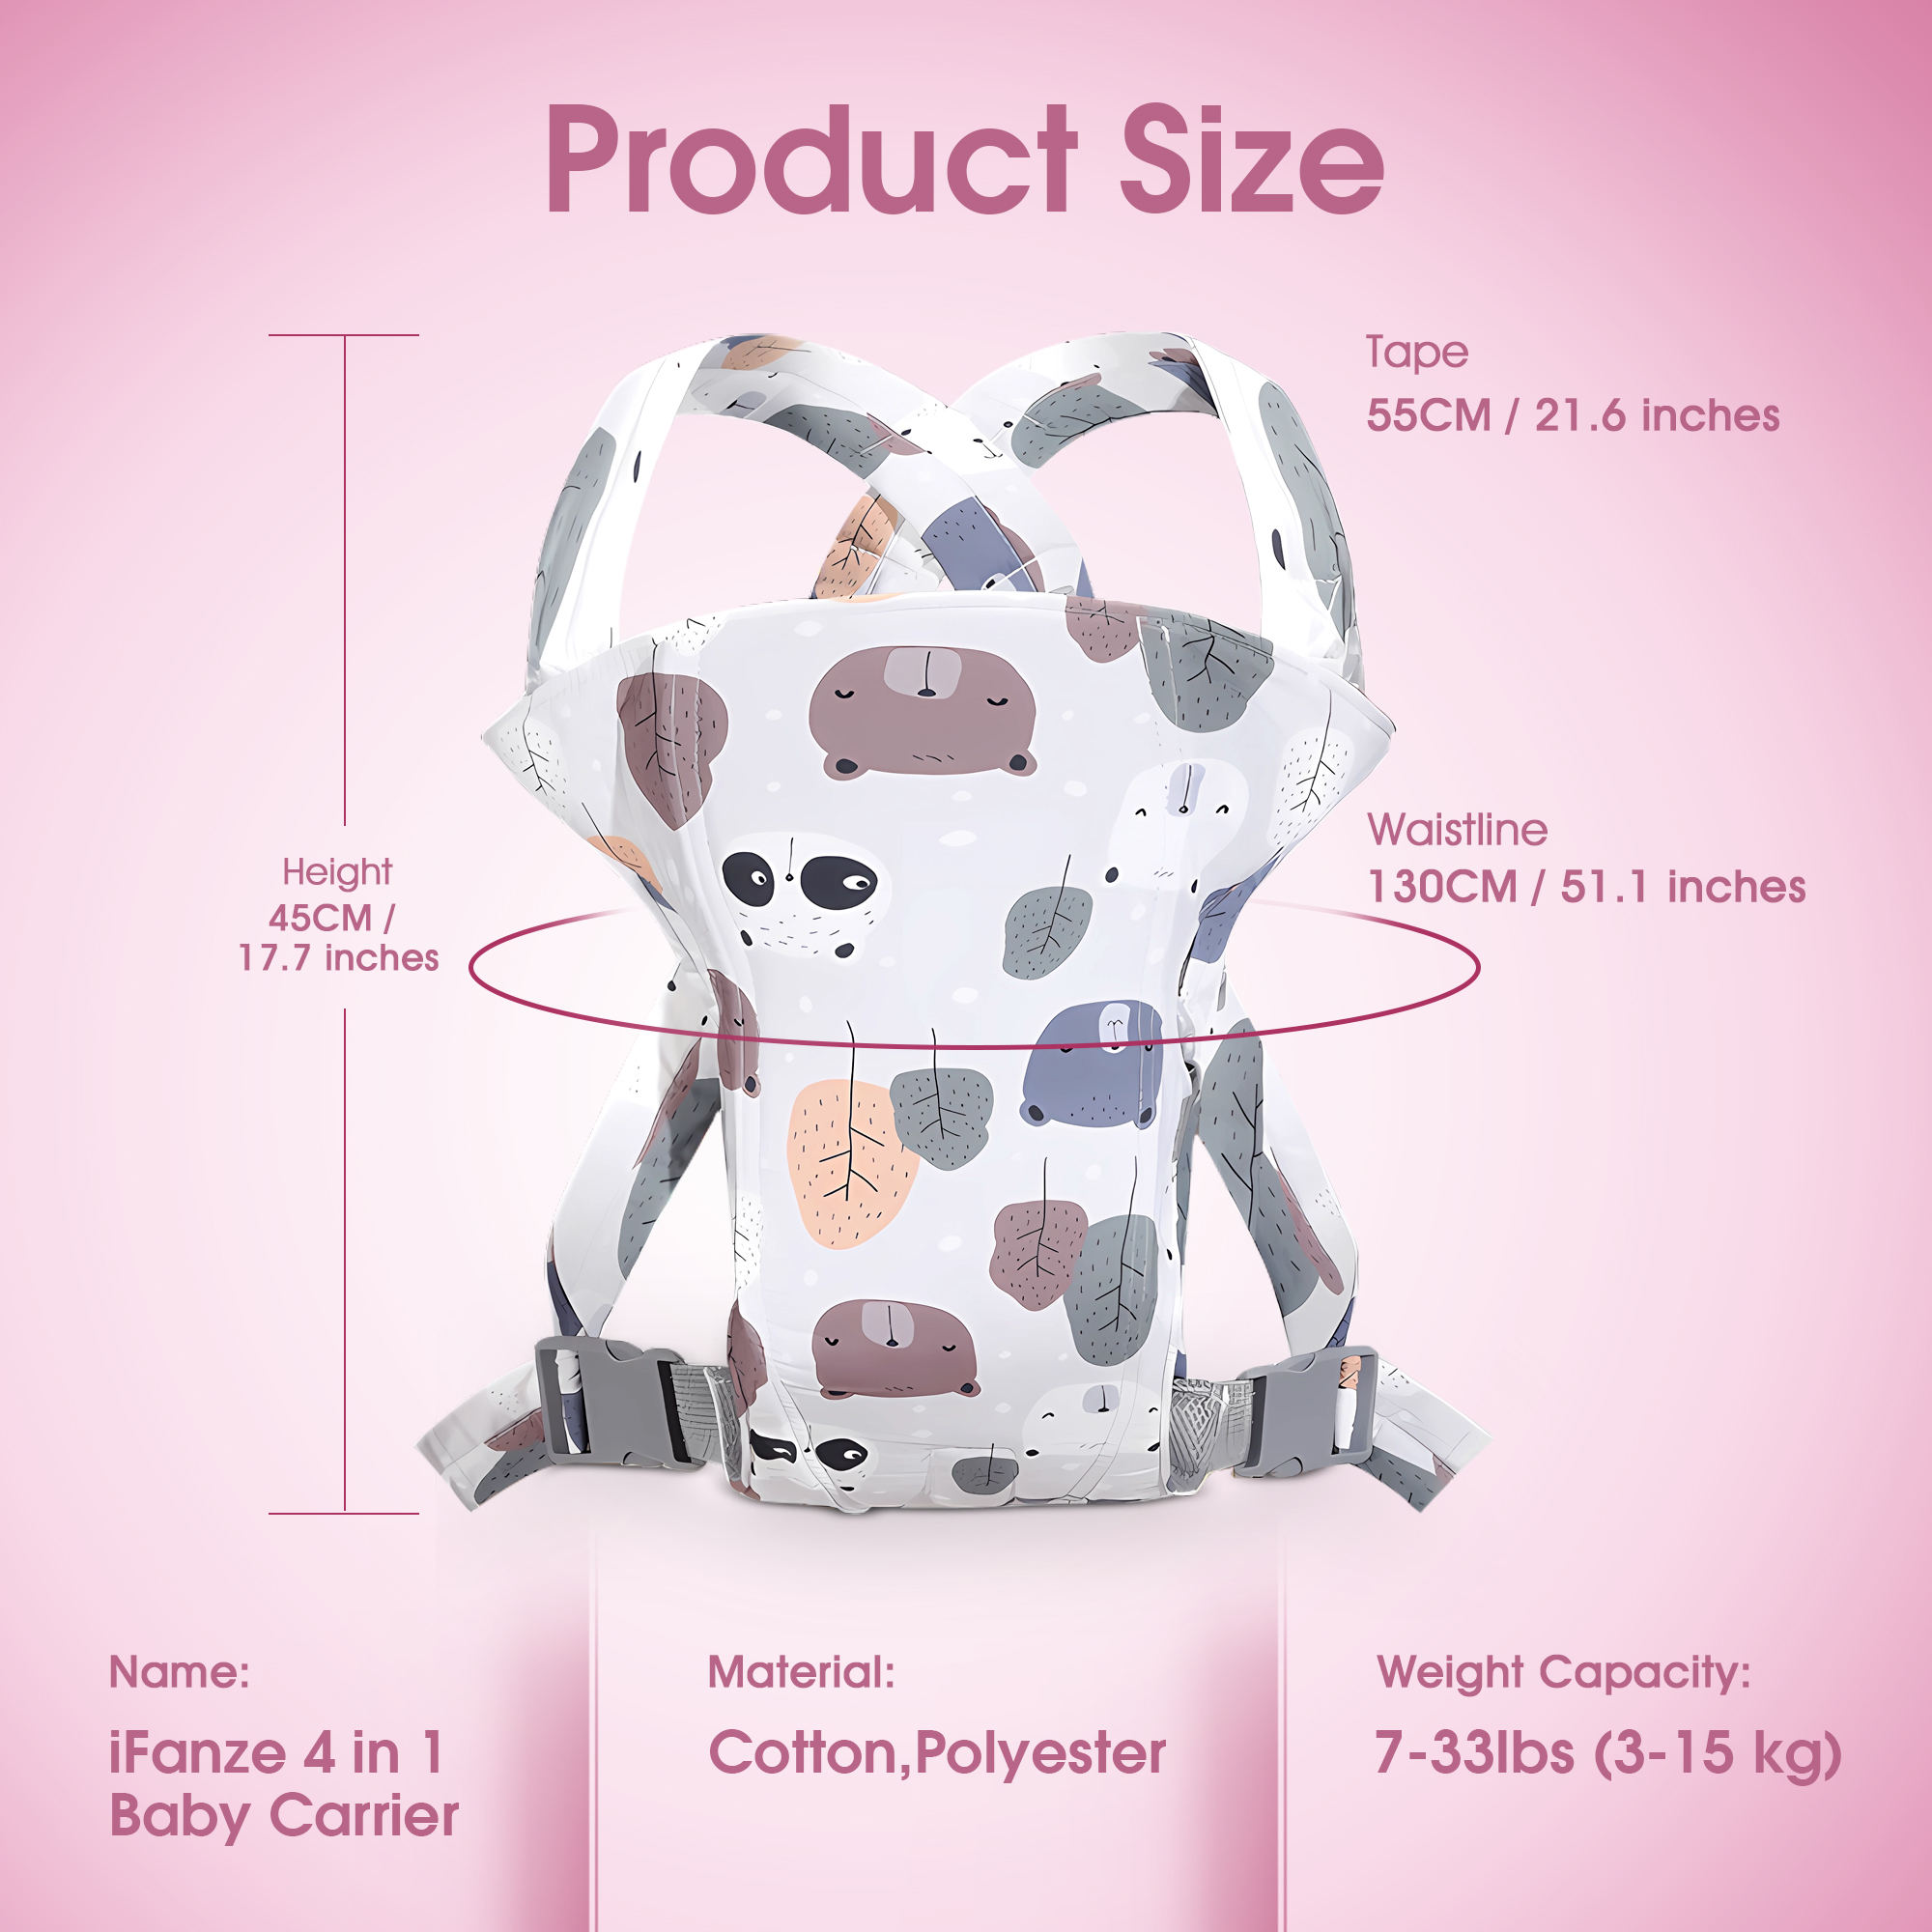 4 in 1 Baby Carrier, Infant Wraps Carrier Ergonomic Baby Carrier Backpack, Newborn Carrier for Baby Carrier Newborn to Toddler, Colorful - image 2 of 8